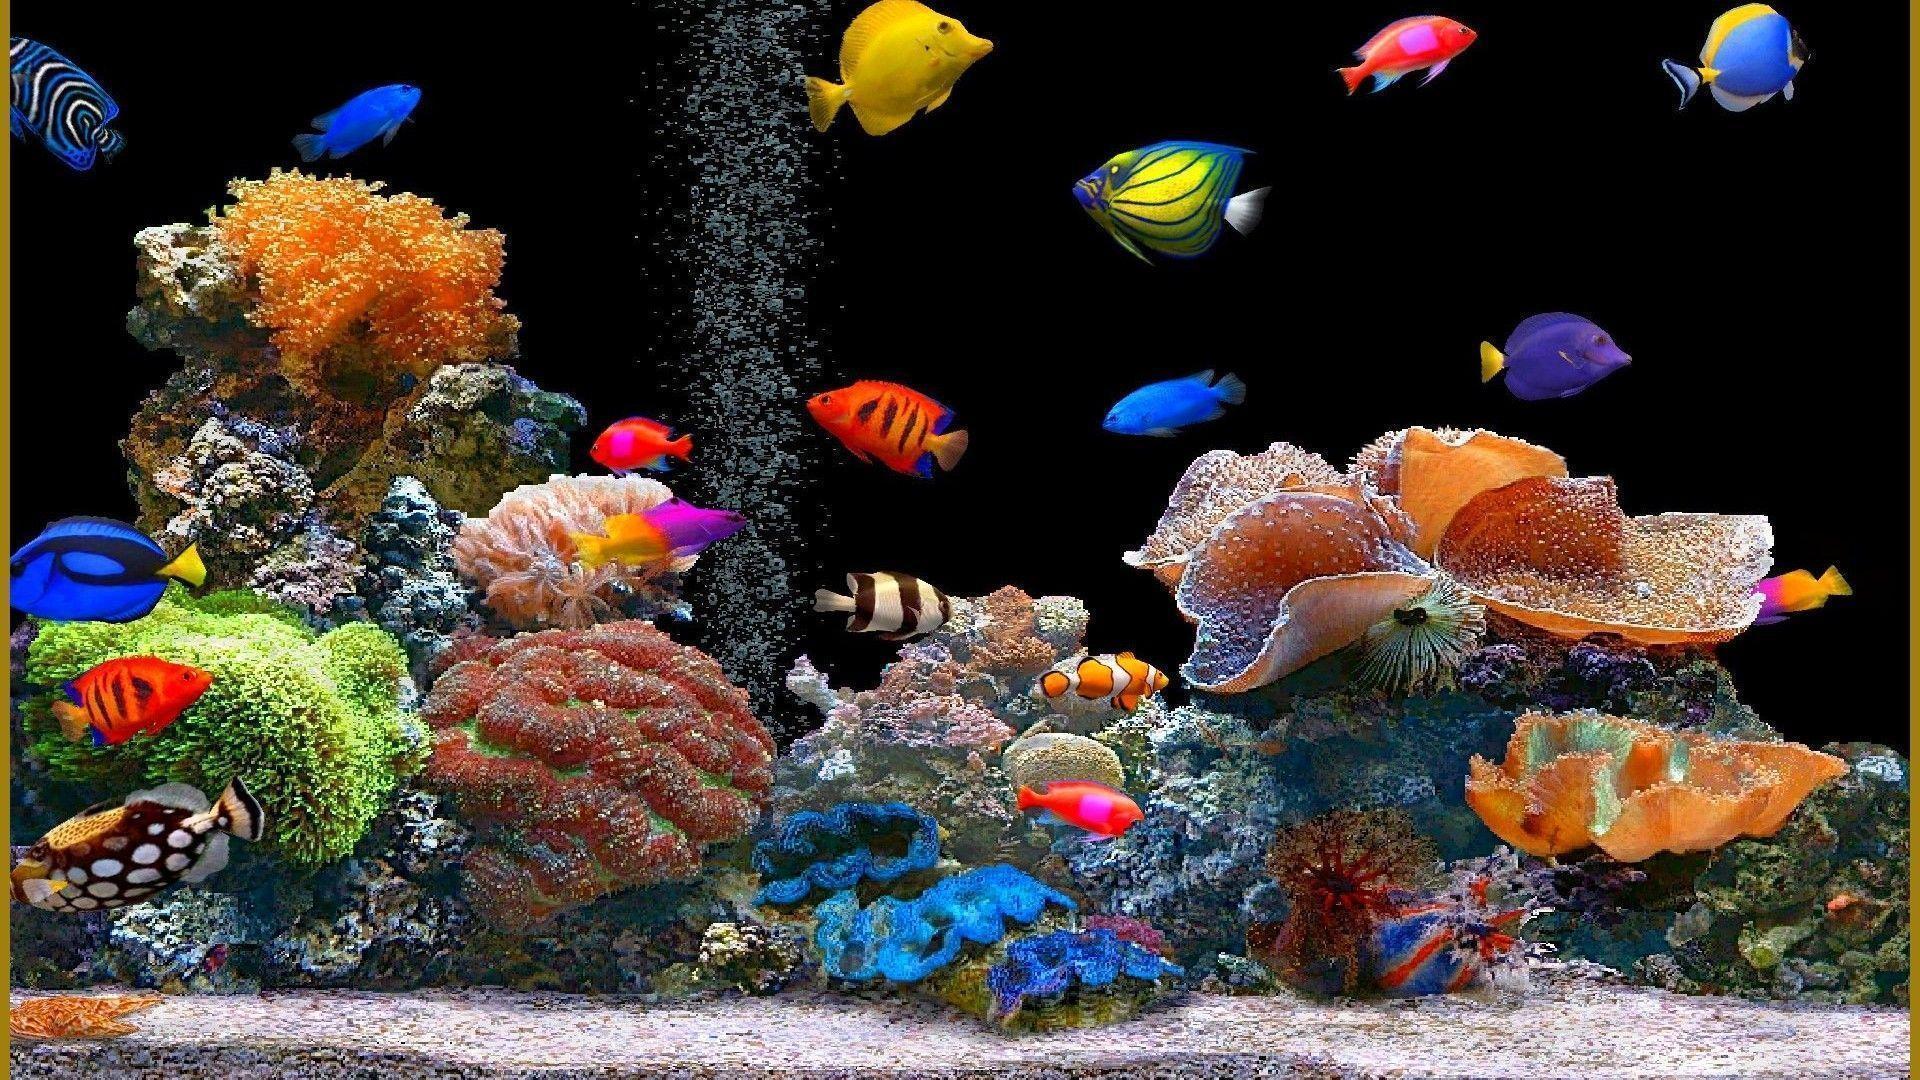 Alluring Fish Wallpaper 1920x1080PX Remarkable Free Download